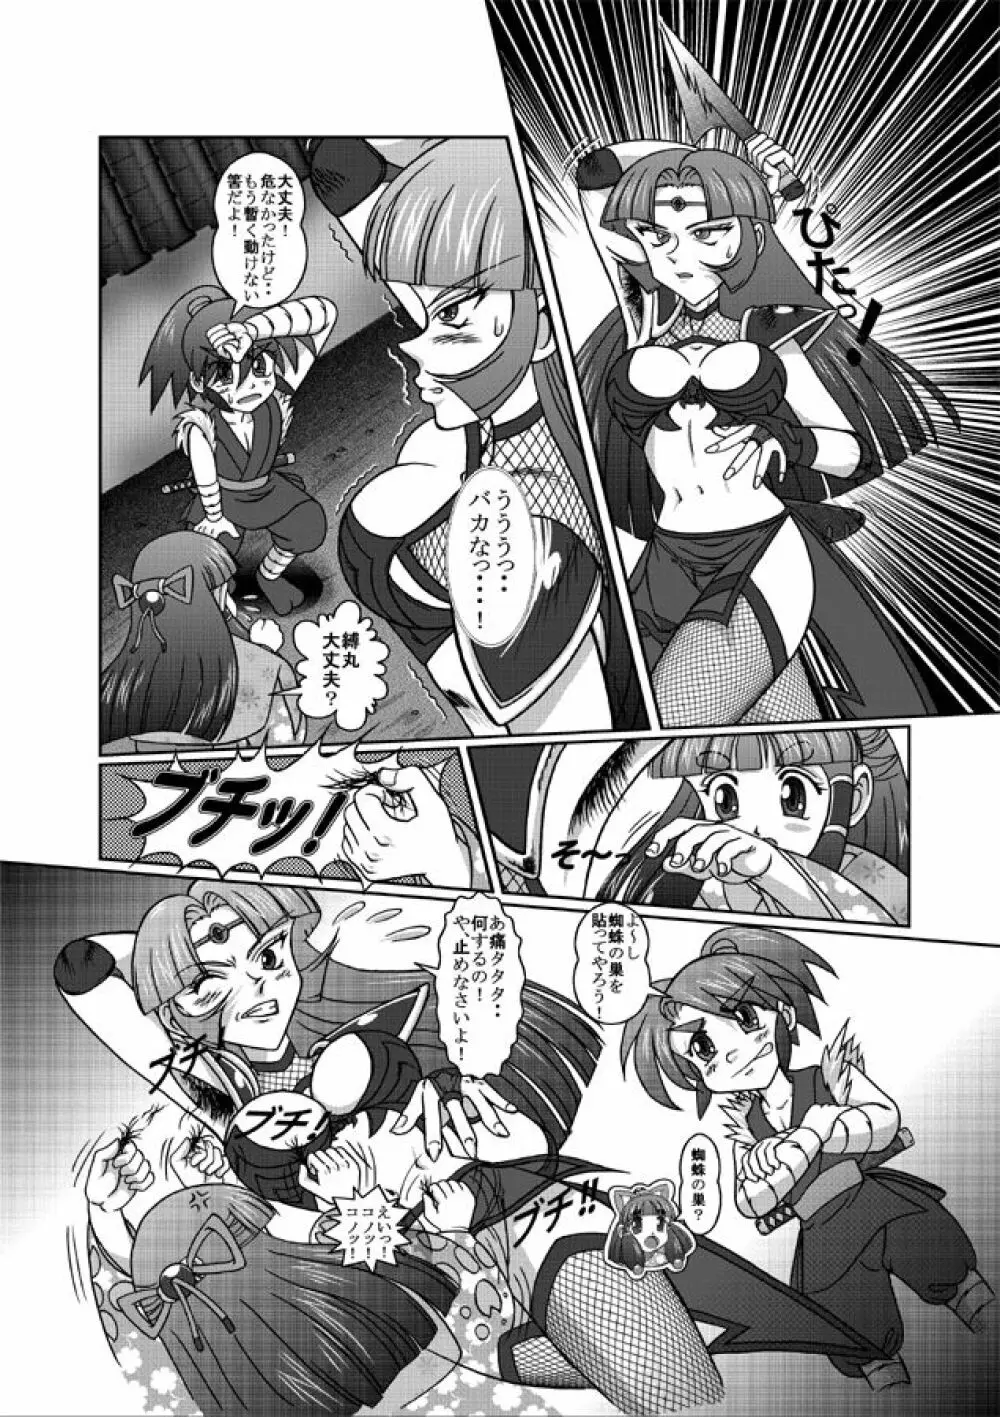 Same-themed manga about kid fighting female ninjas from japanese imageboard. Page.29